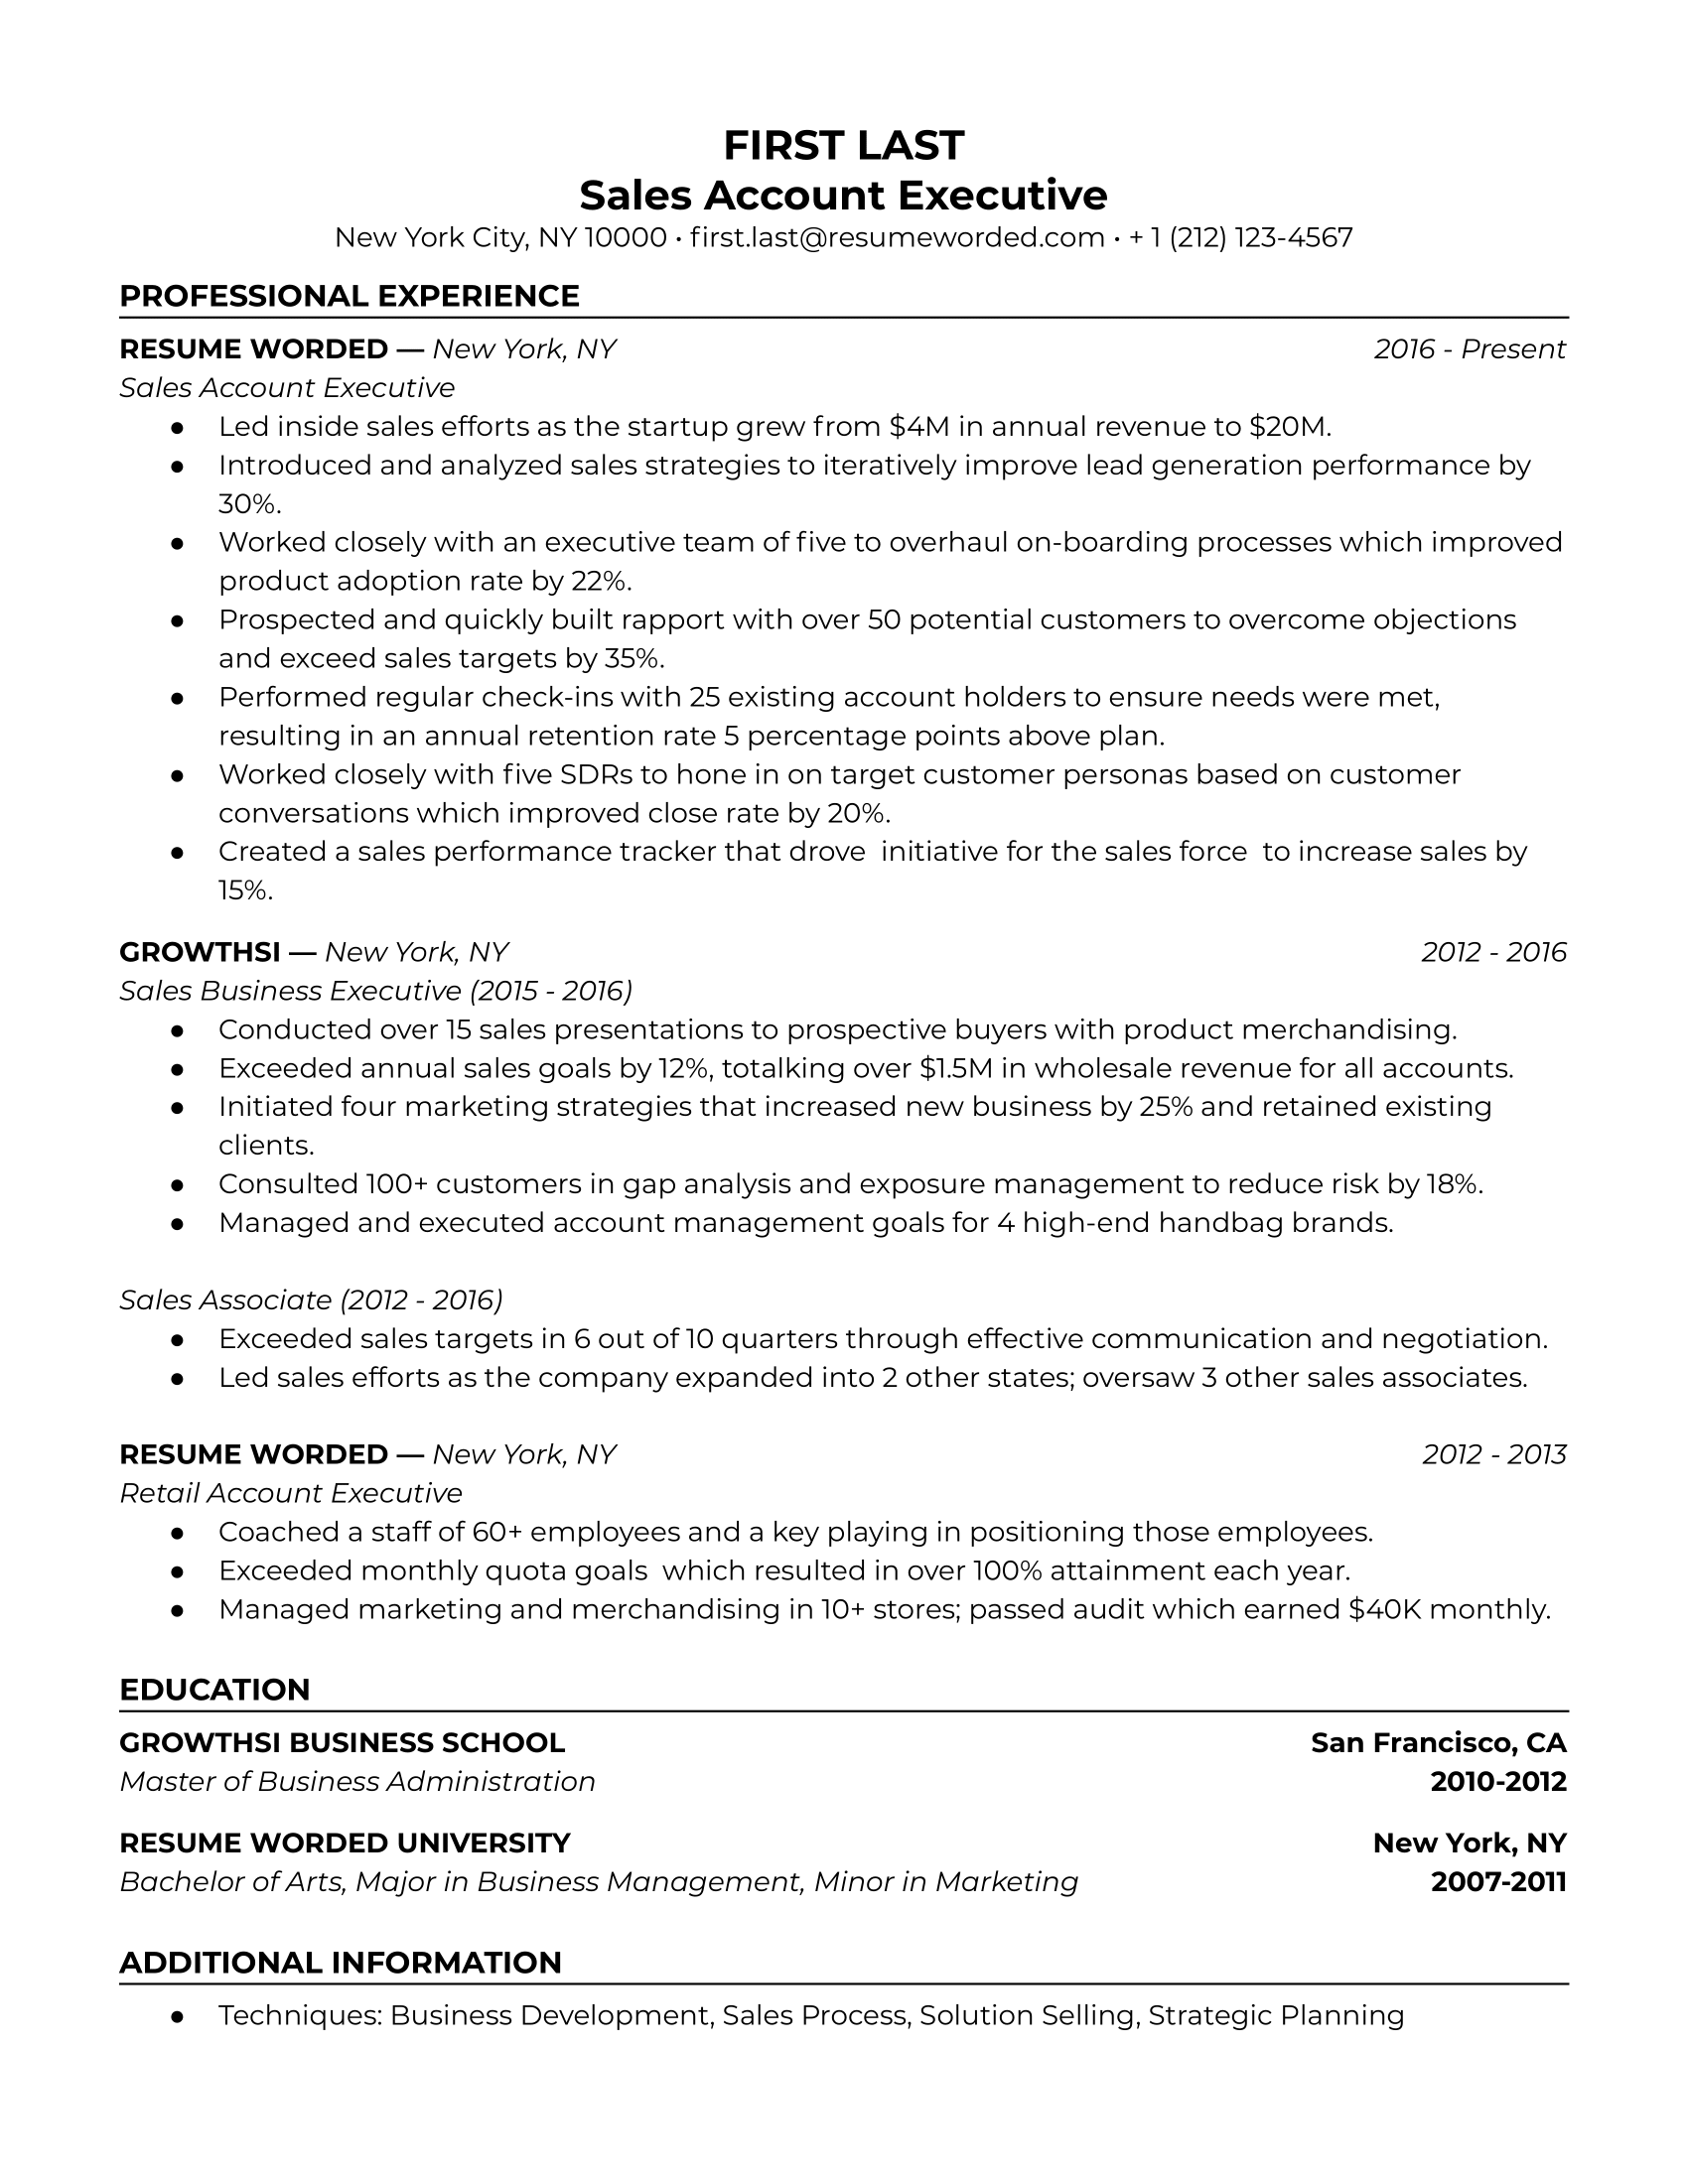 A Sales Account Executive resume showcasing experience in identifying business opportunities, developing relationships with clients, and meeting sales targets